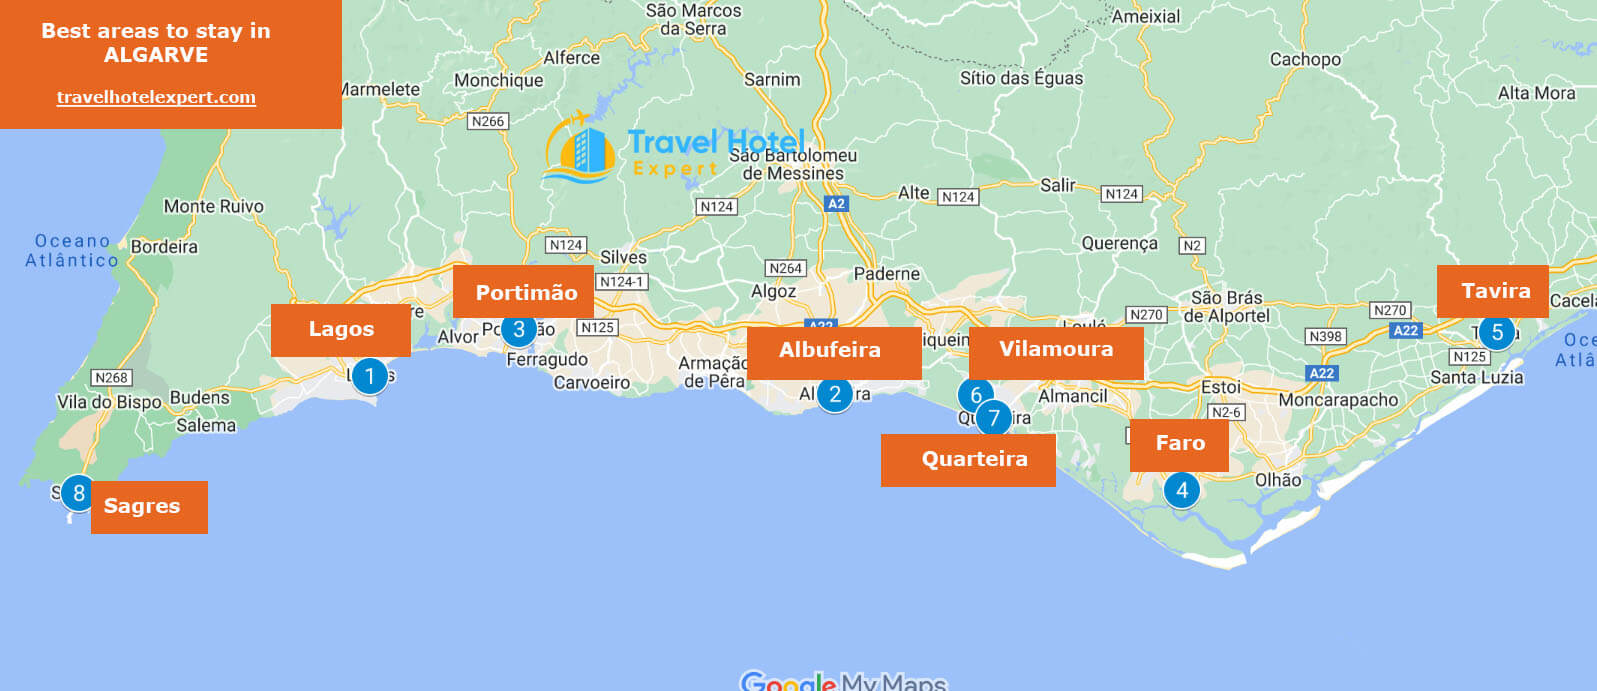 Map of the best areas to stay in Algarve without a car